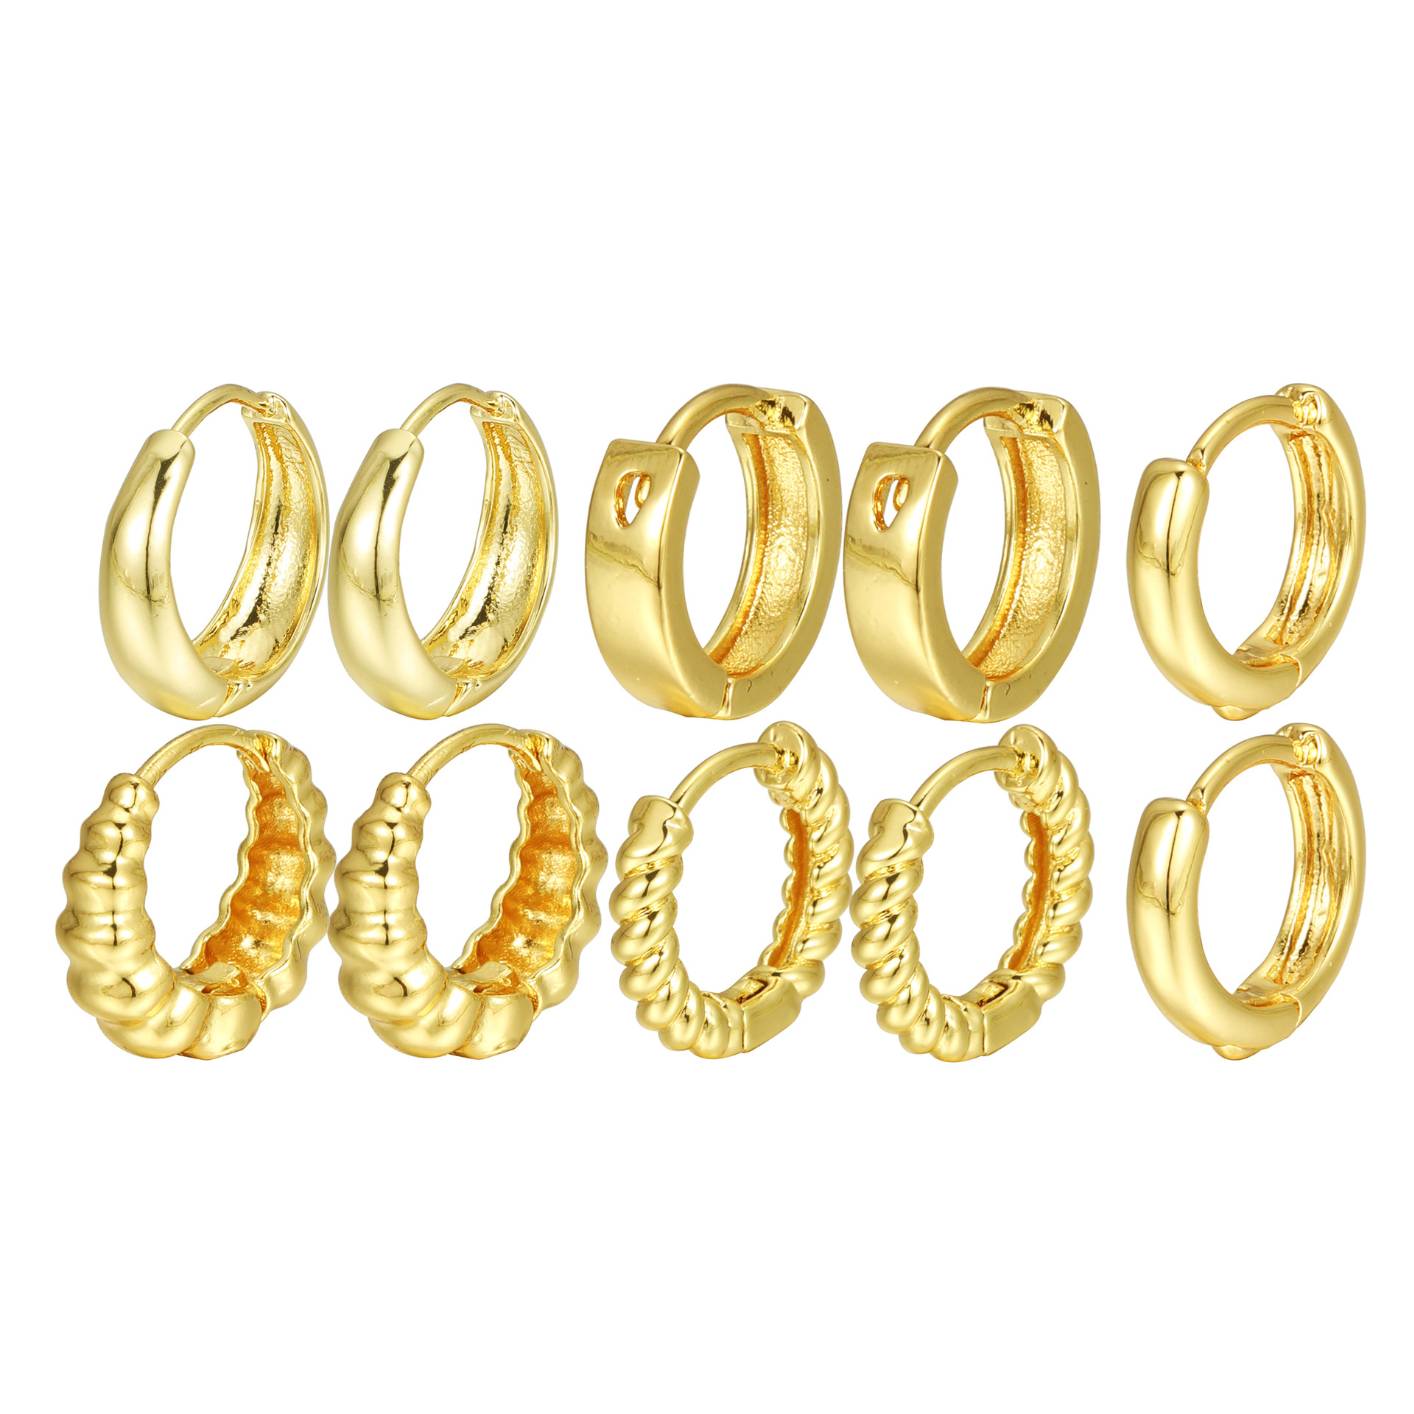 5789601 6 Pairs Fashion Gold Color Hoop Earring Set for Women Girls Simple Circle Stud Earrings New Trendy Jewelry Accessories